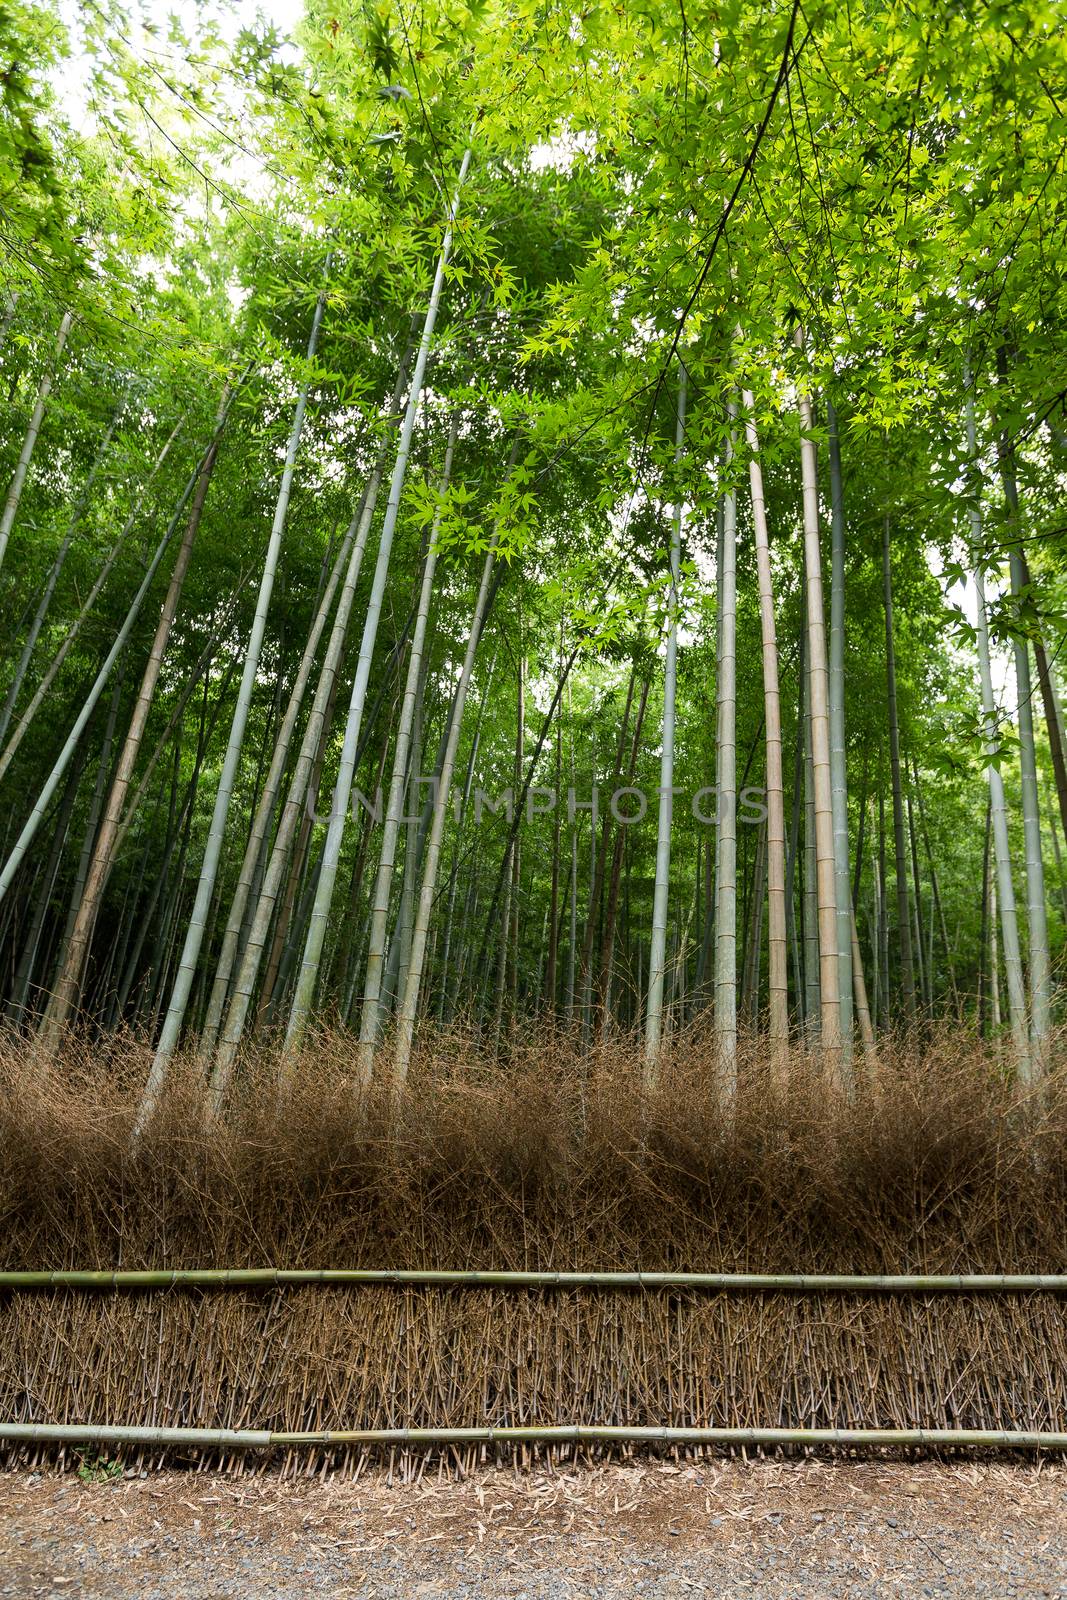 Green Bamboo forest in Kyoto by leungchopan